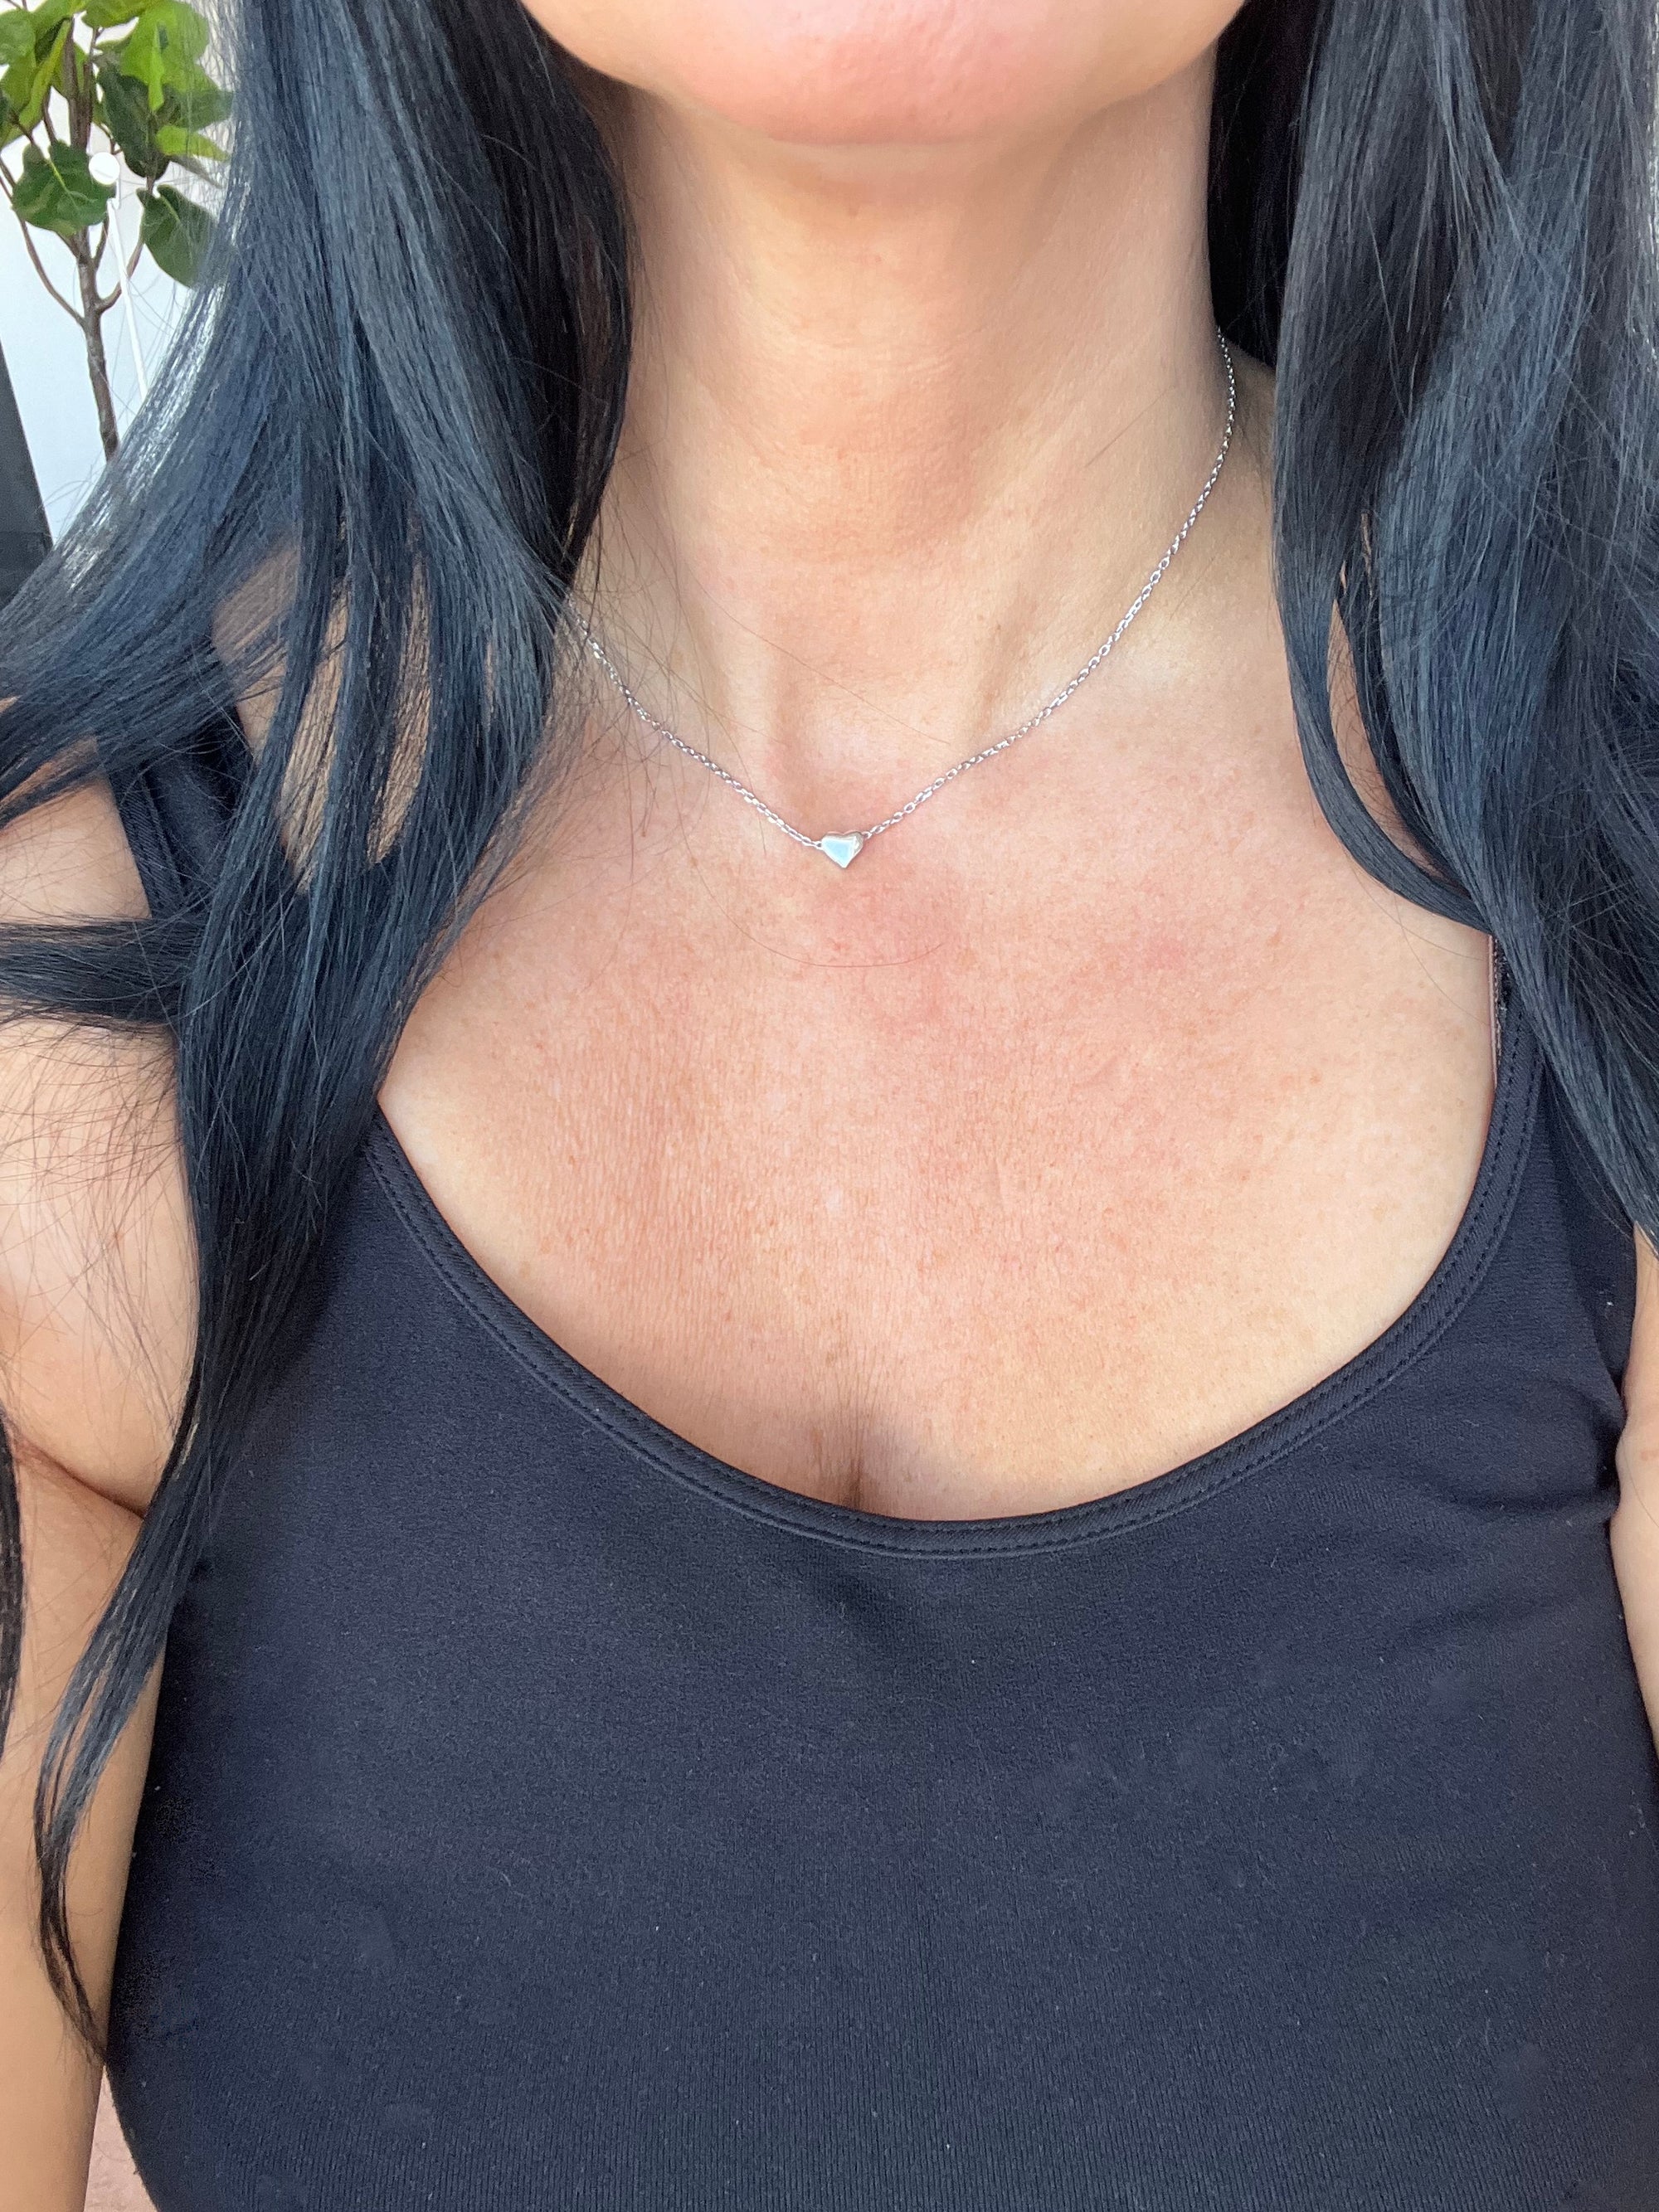 The Petite Silver Heart Necklace